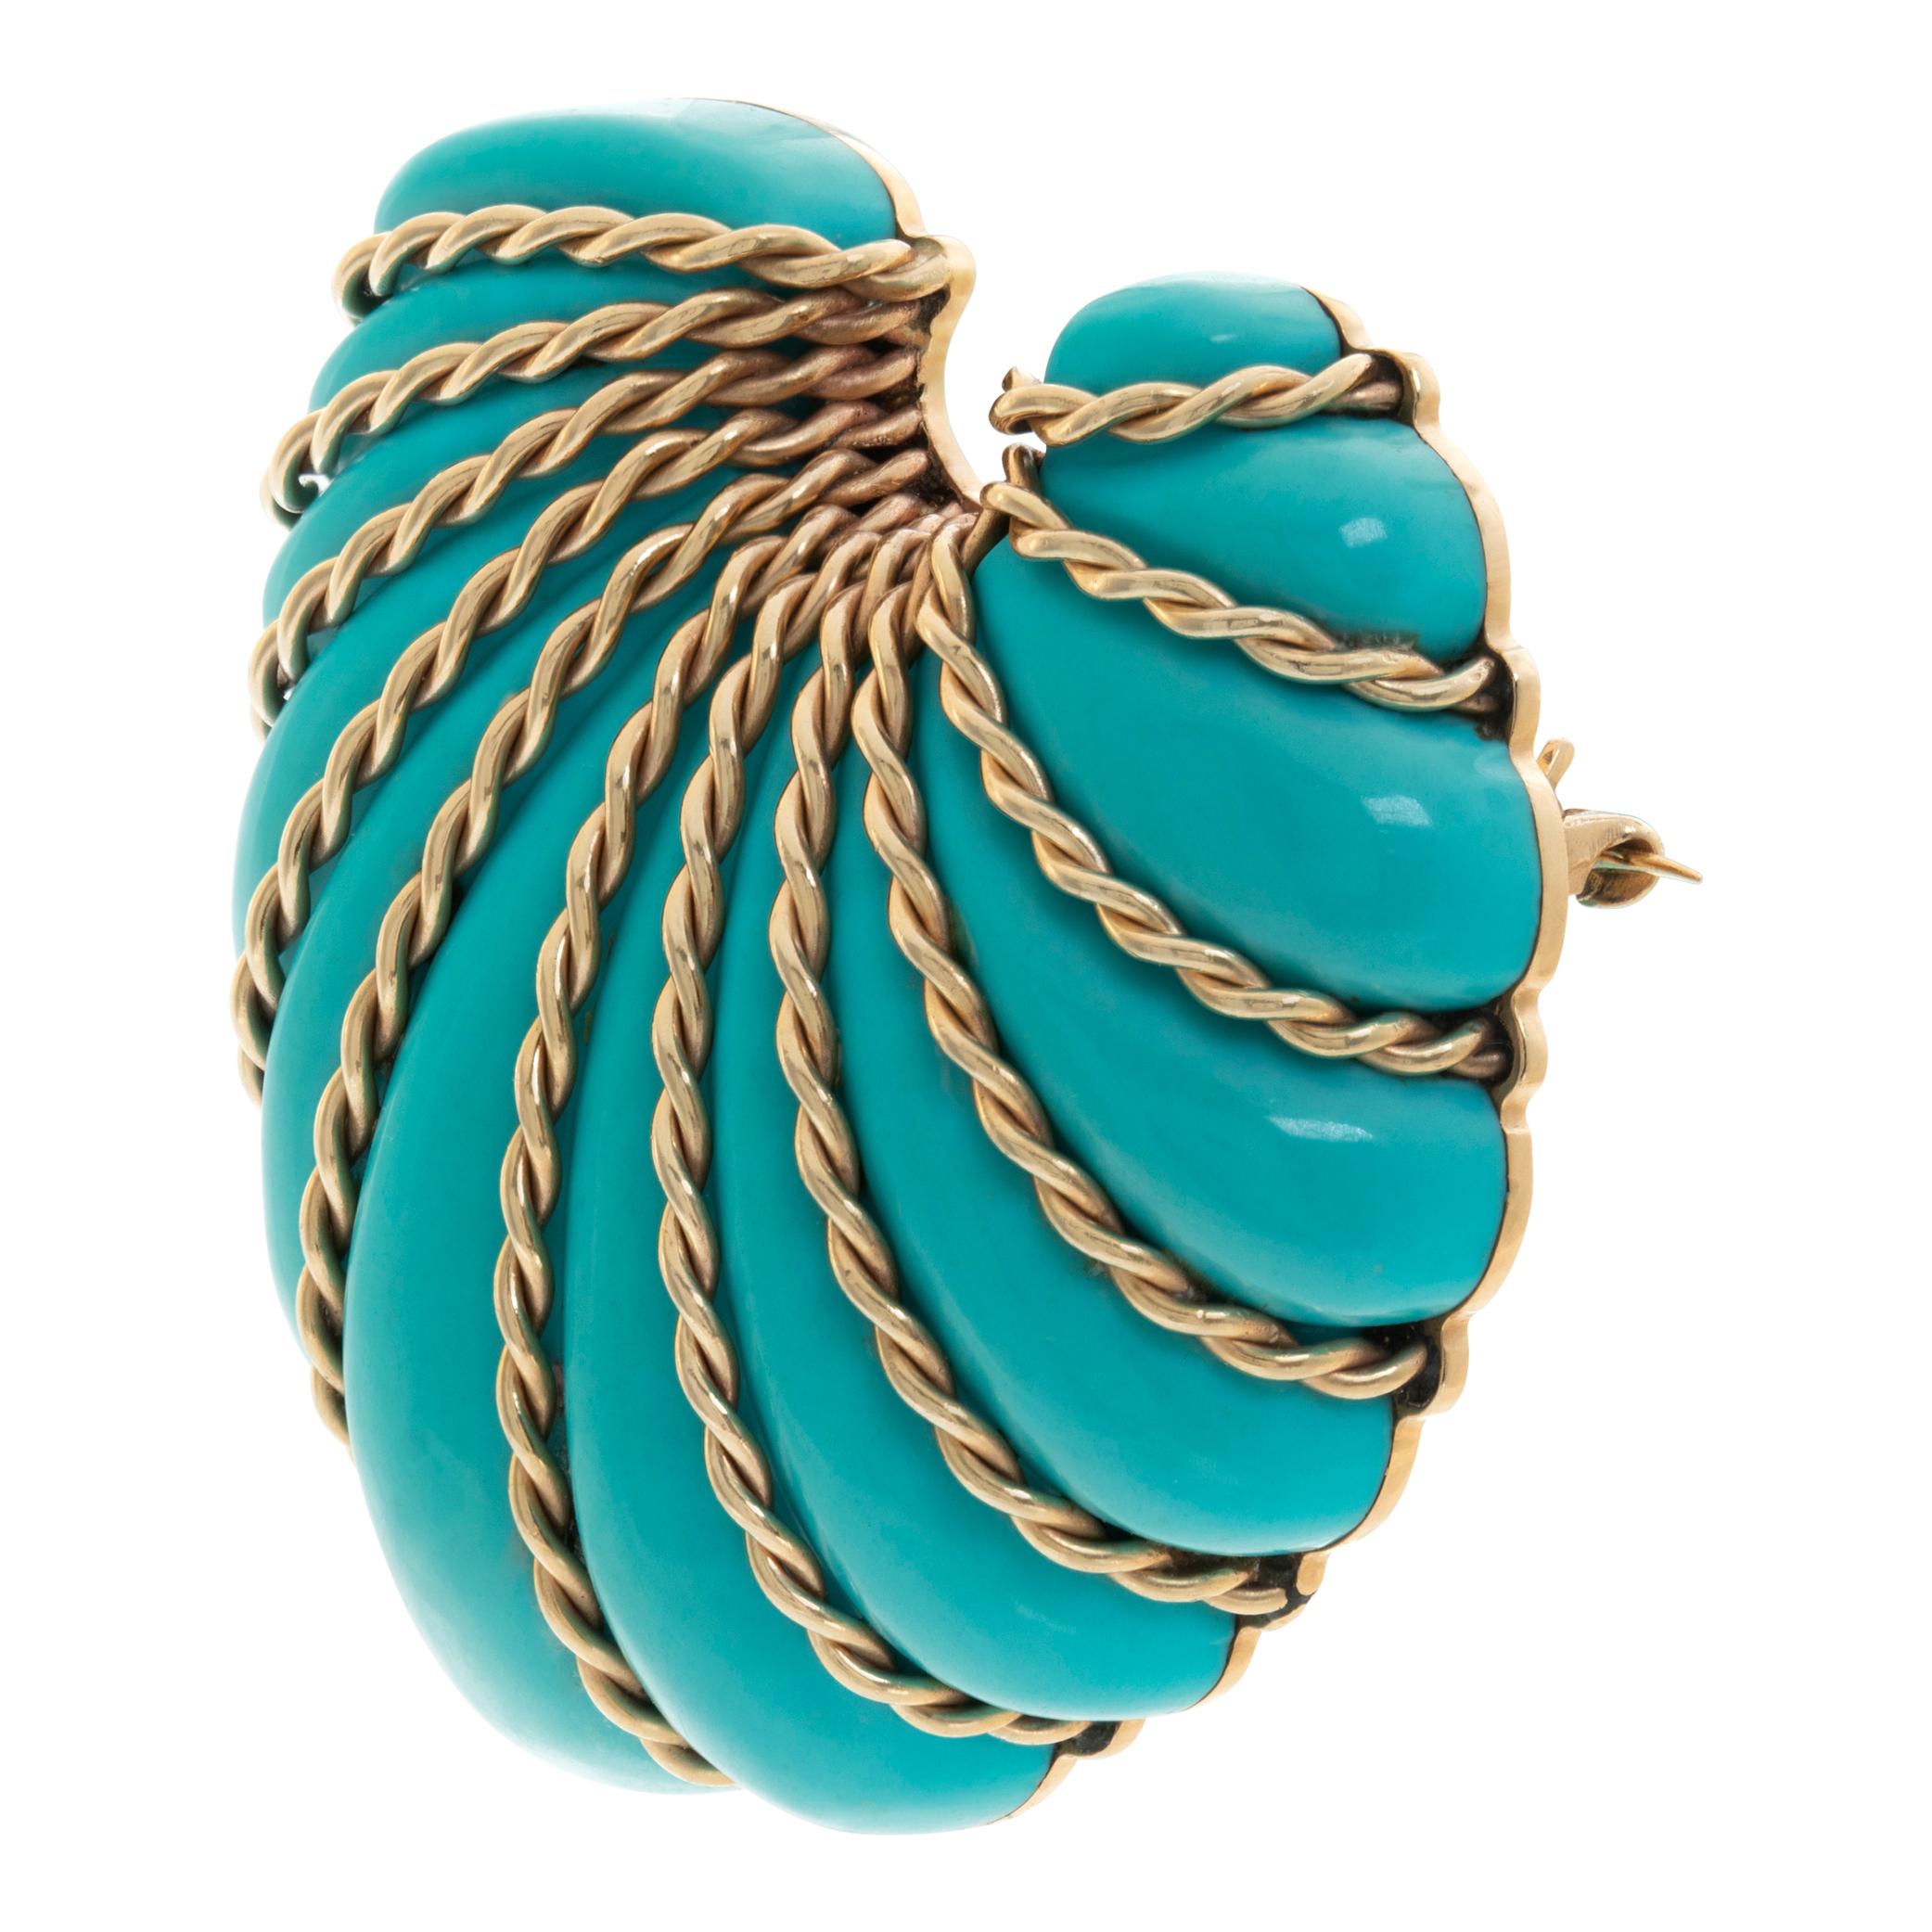 Seaman Schepps iconic turquoise shell design brooch with signature 14k twisted gold threads accenting the curves of the carved composite turquoise. 1.75 inches by 2 inches.